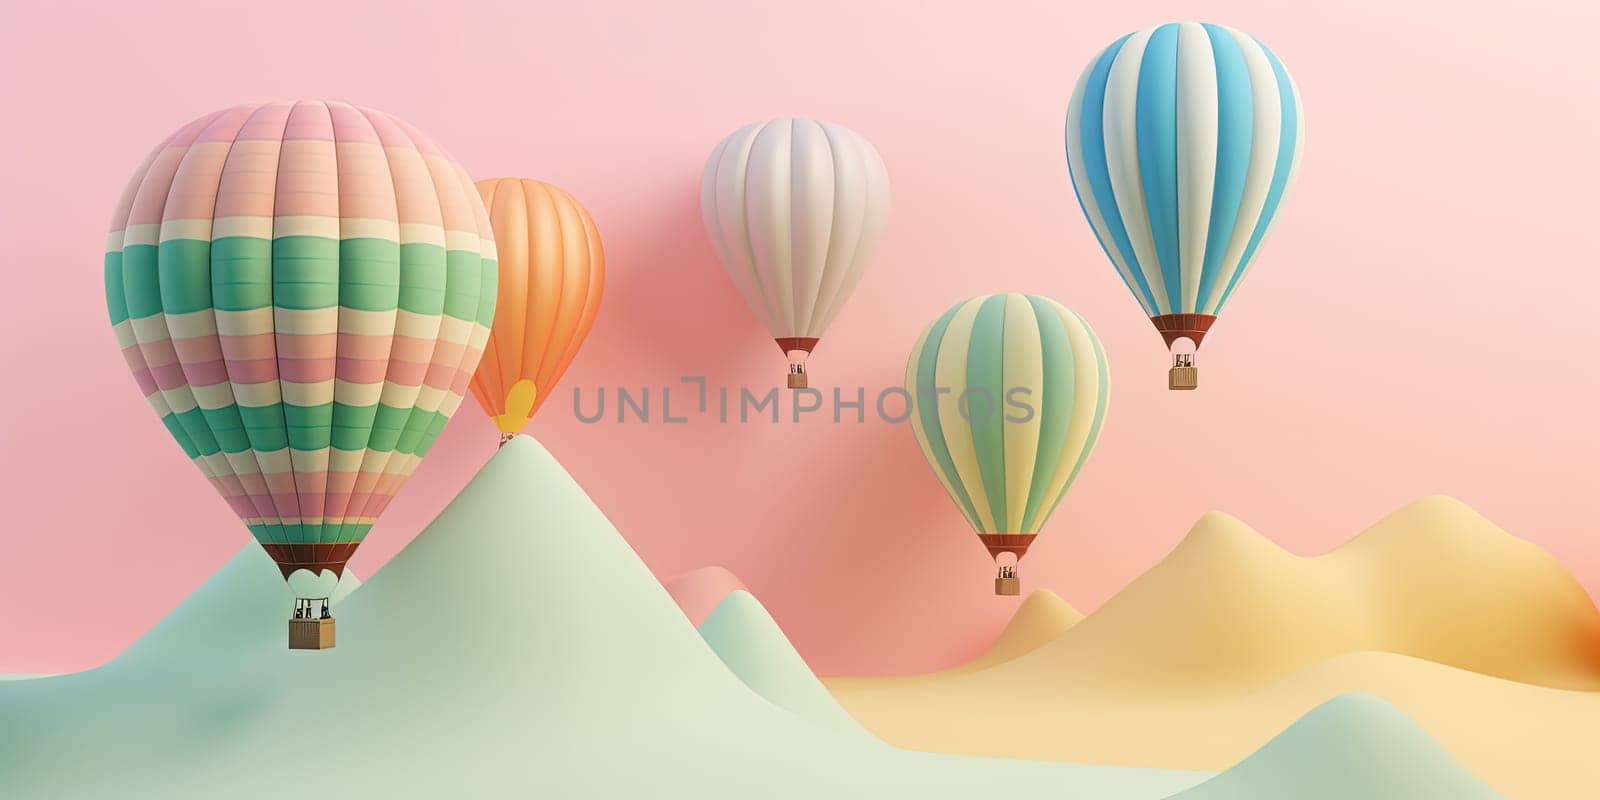 Illustration Of Colorful Hat Air Balloons by GekaSkr